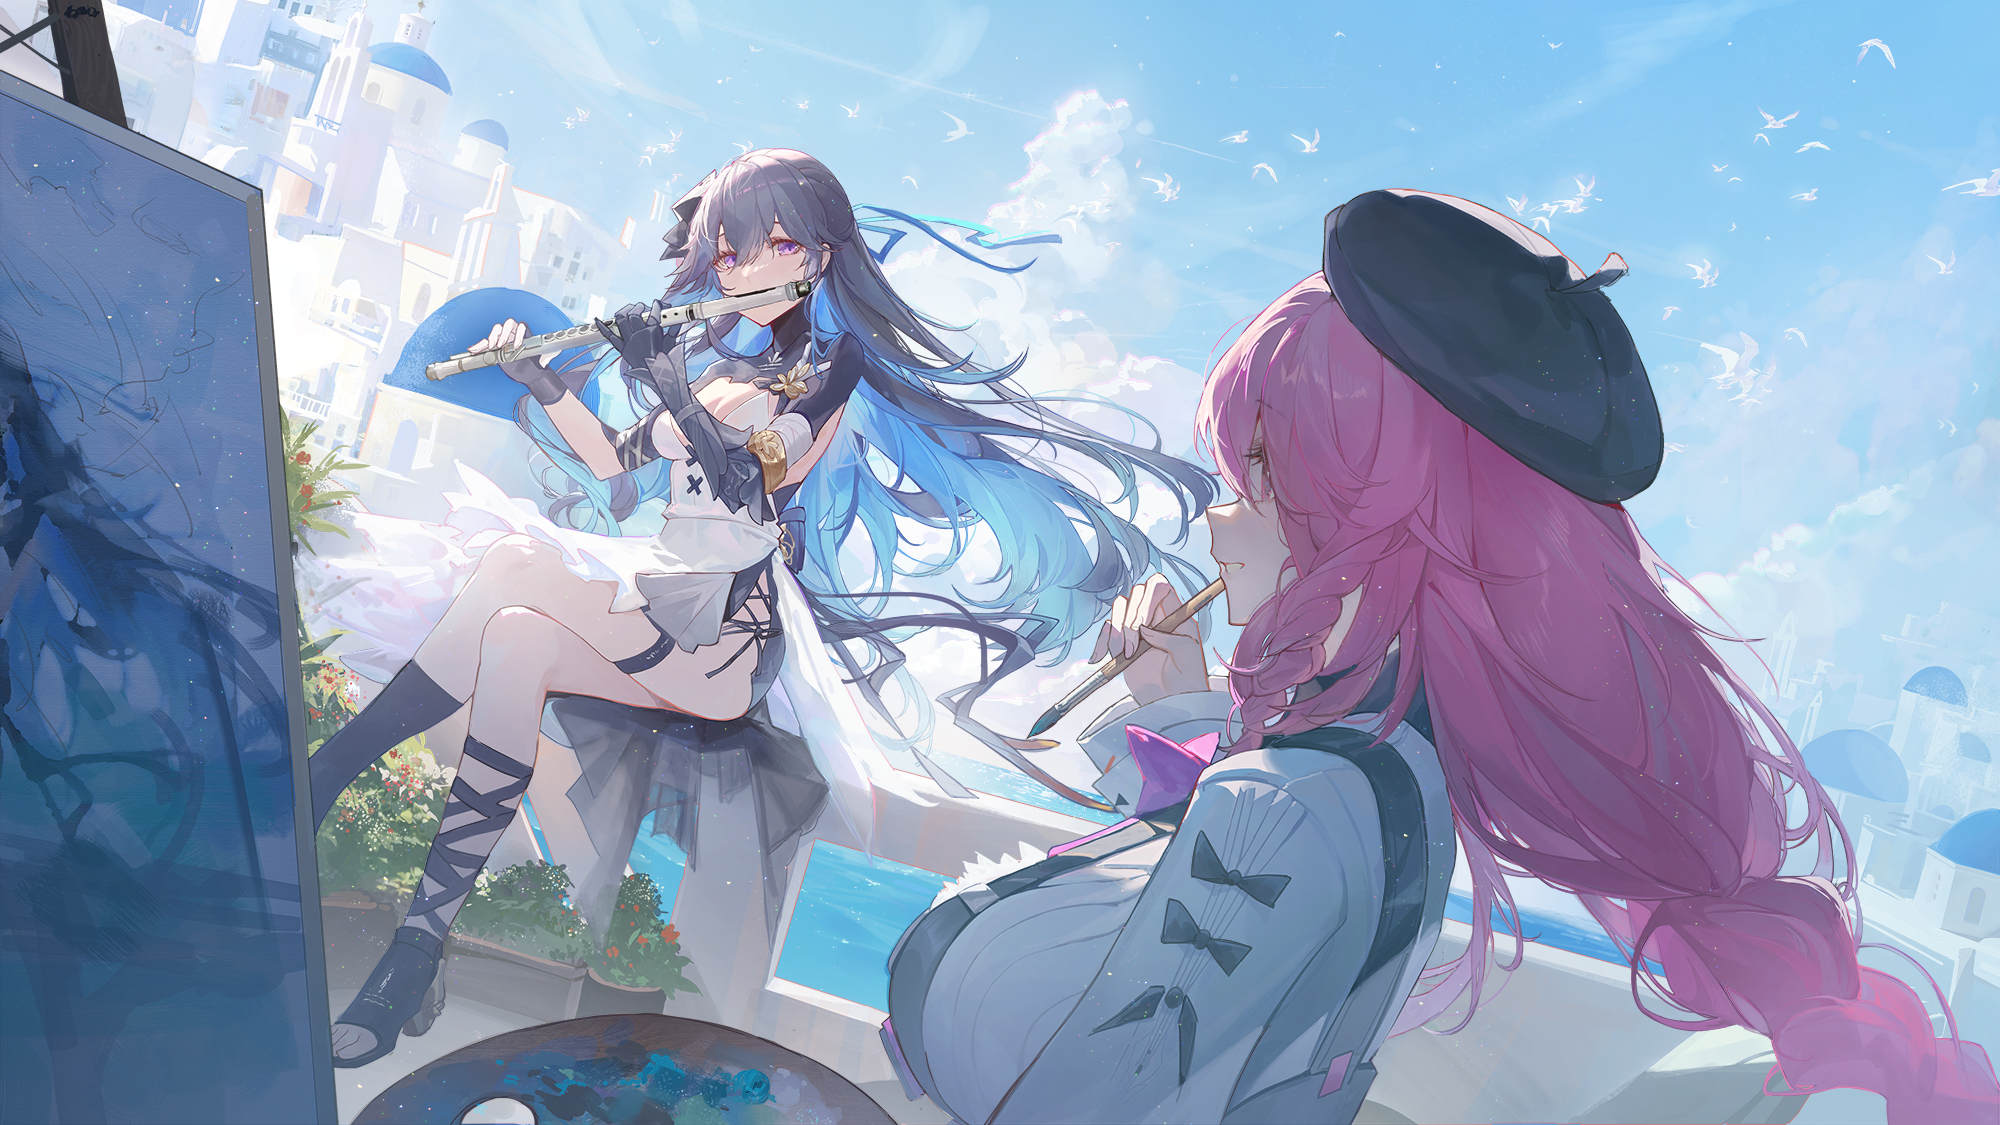 Anime 2000x1125 Punishing: Gray Raven Kuroduki anime girls painting legs crossed musical instrument sky clouds flute hat braids long hair hair blowing in the wind sitting paint brushes